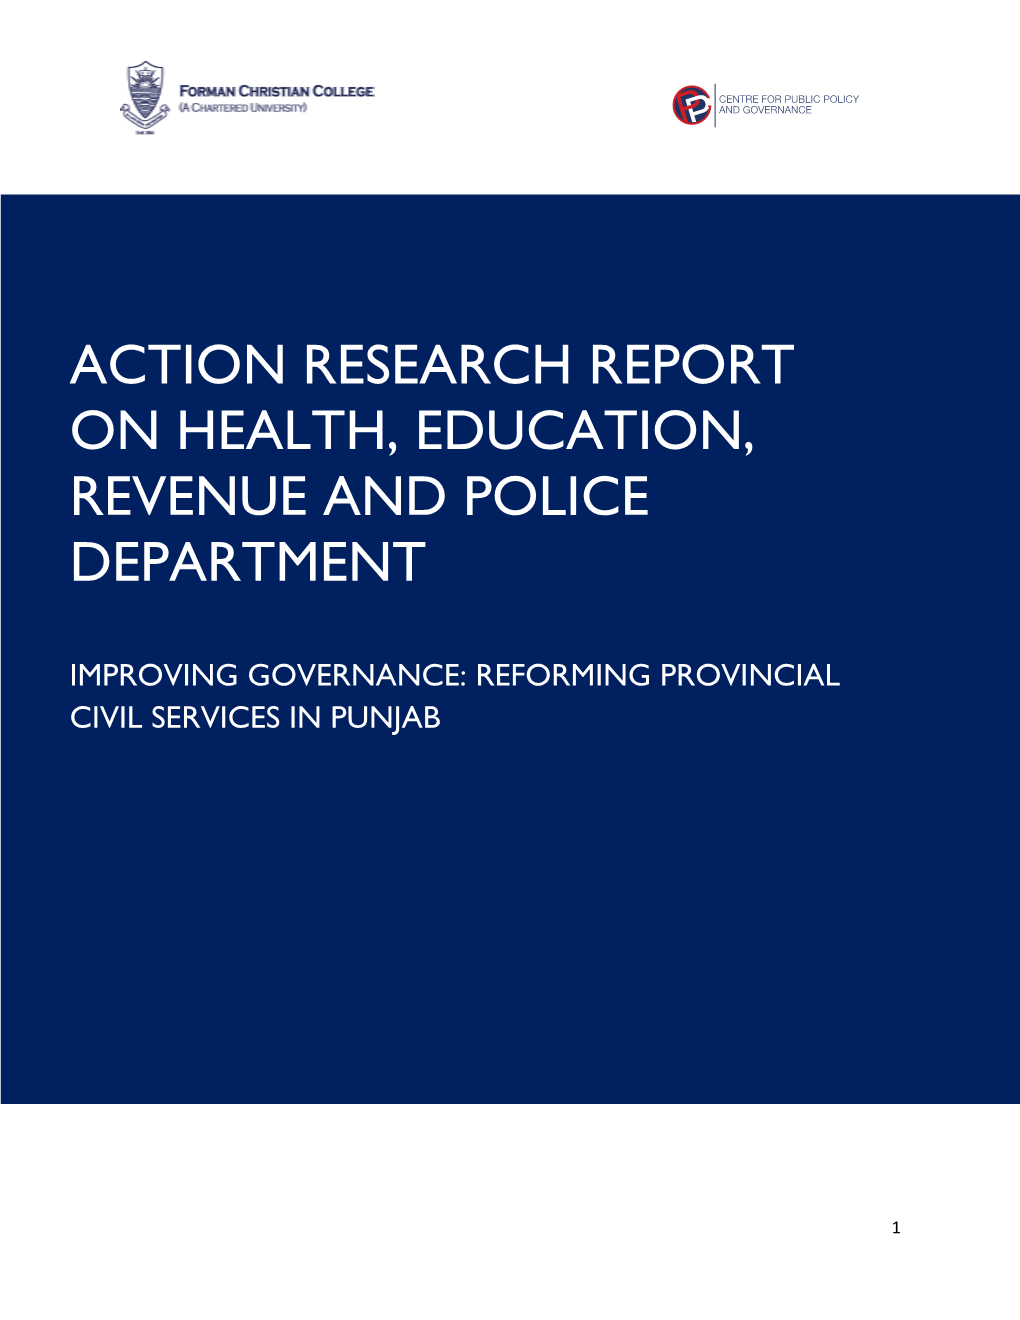 Action Research Report on Health, Education, Revenue and Police Department